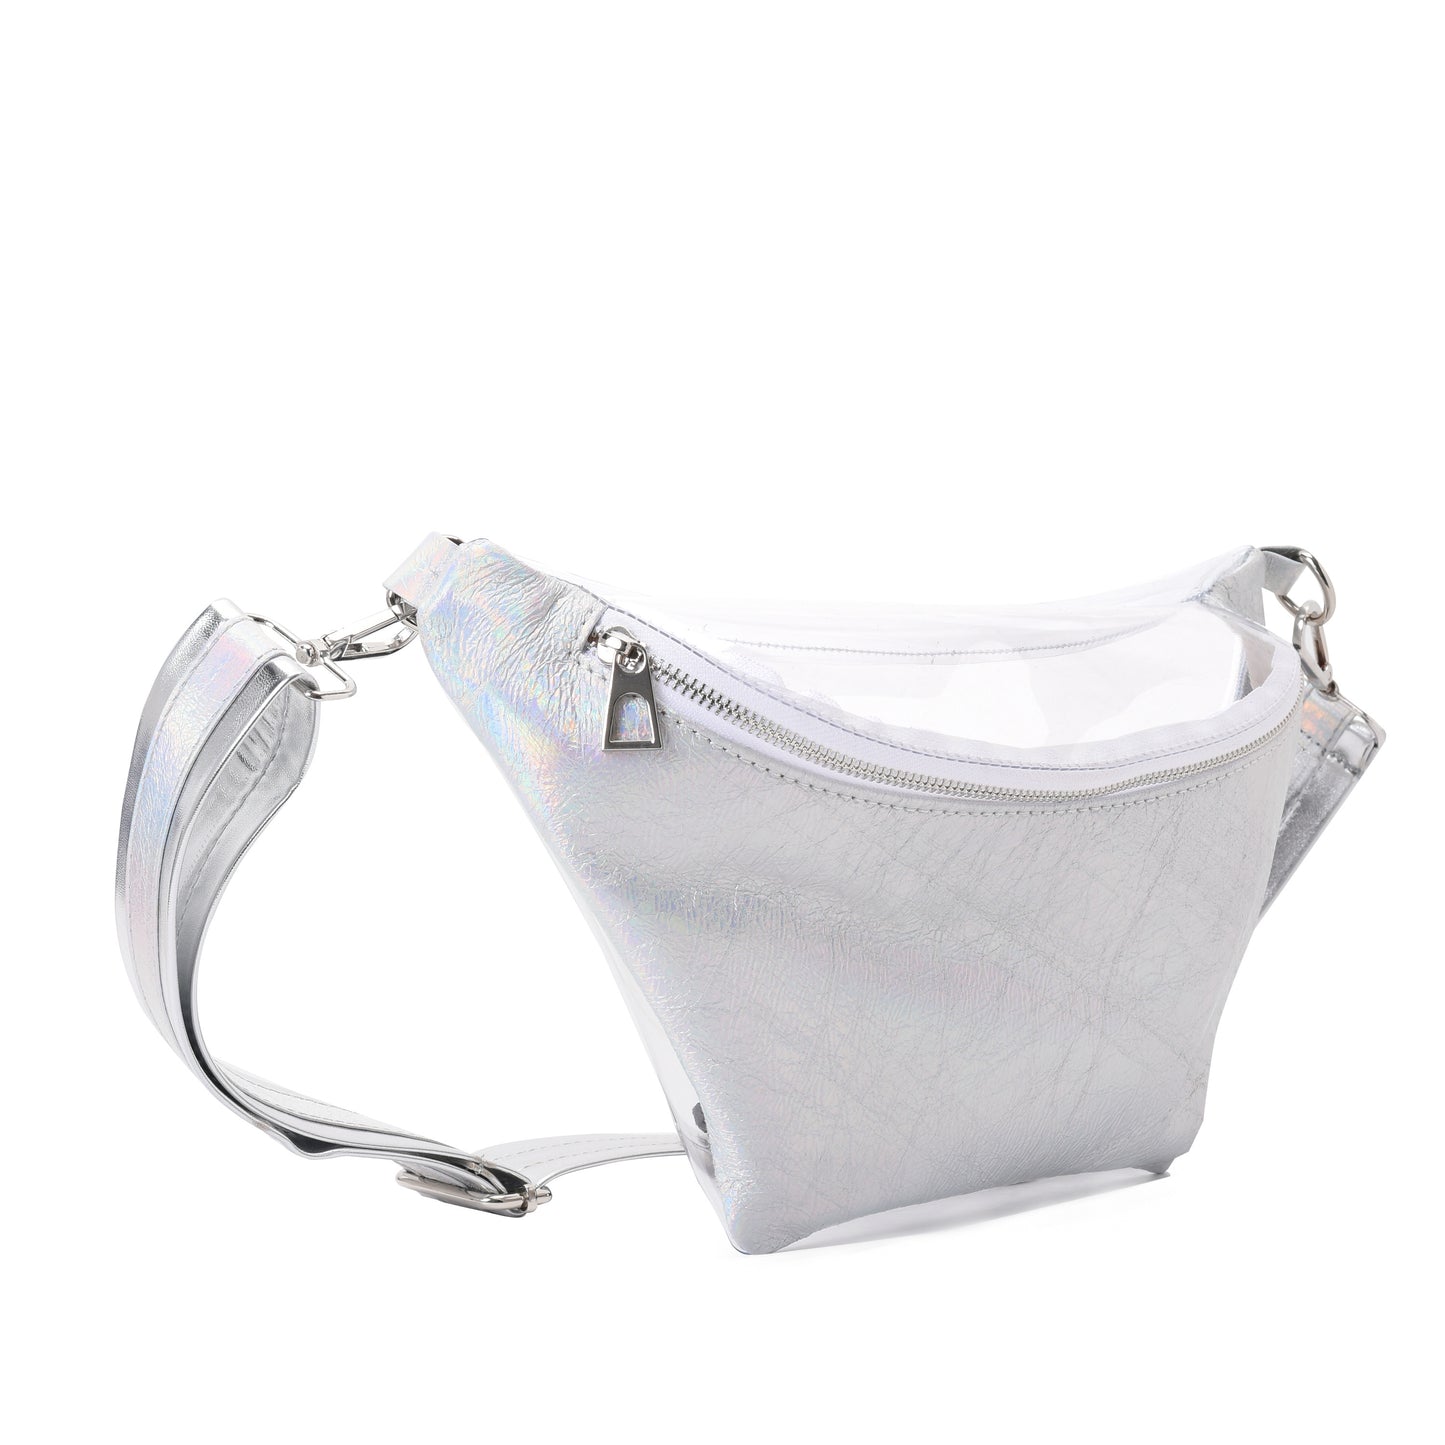 Fanny Beach bag with Metallic Silver Material- 3009